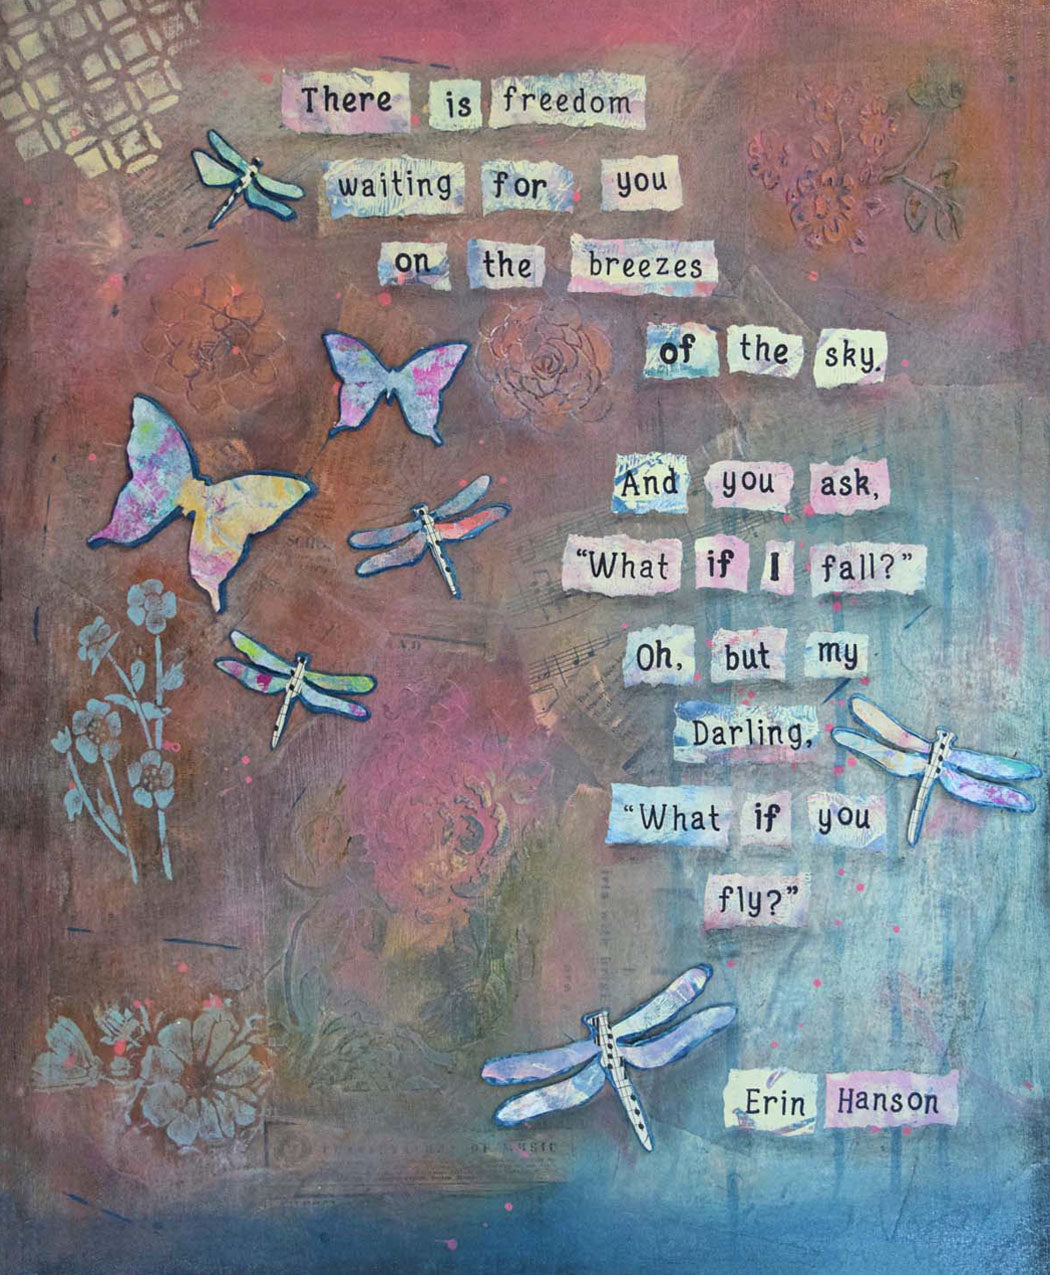 What if You Fly? Magnet 3.5" x 4.25"